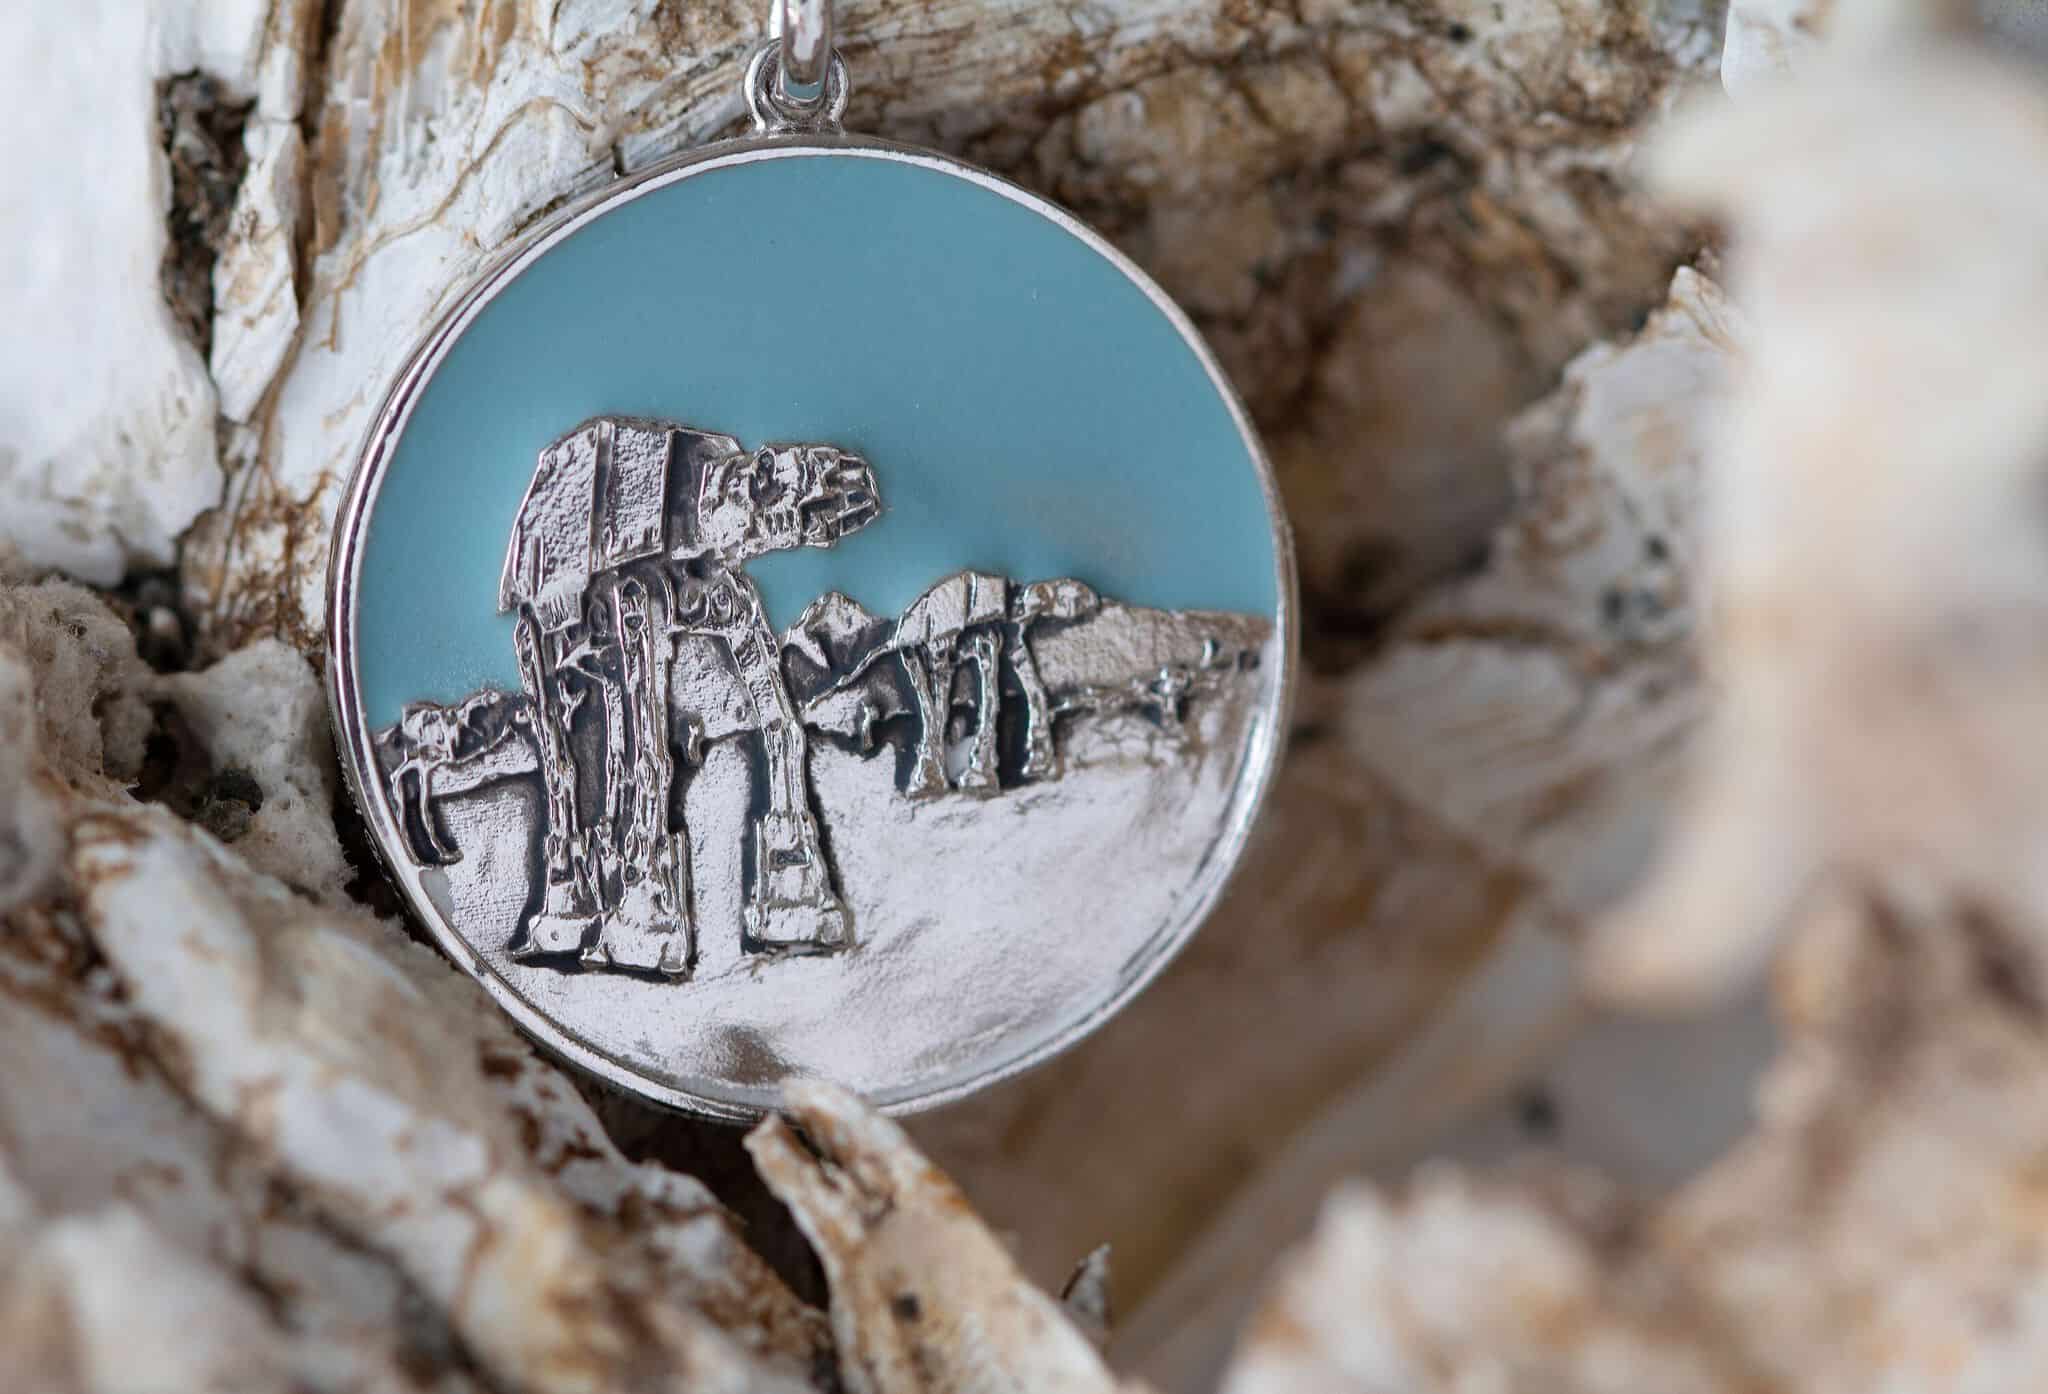 RockLove releasing new Star Wars jewelry line at San Diego Comic-Con